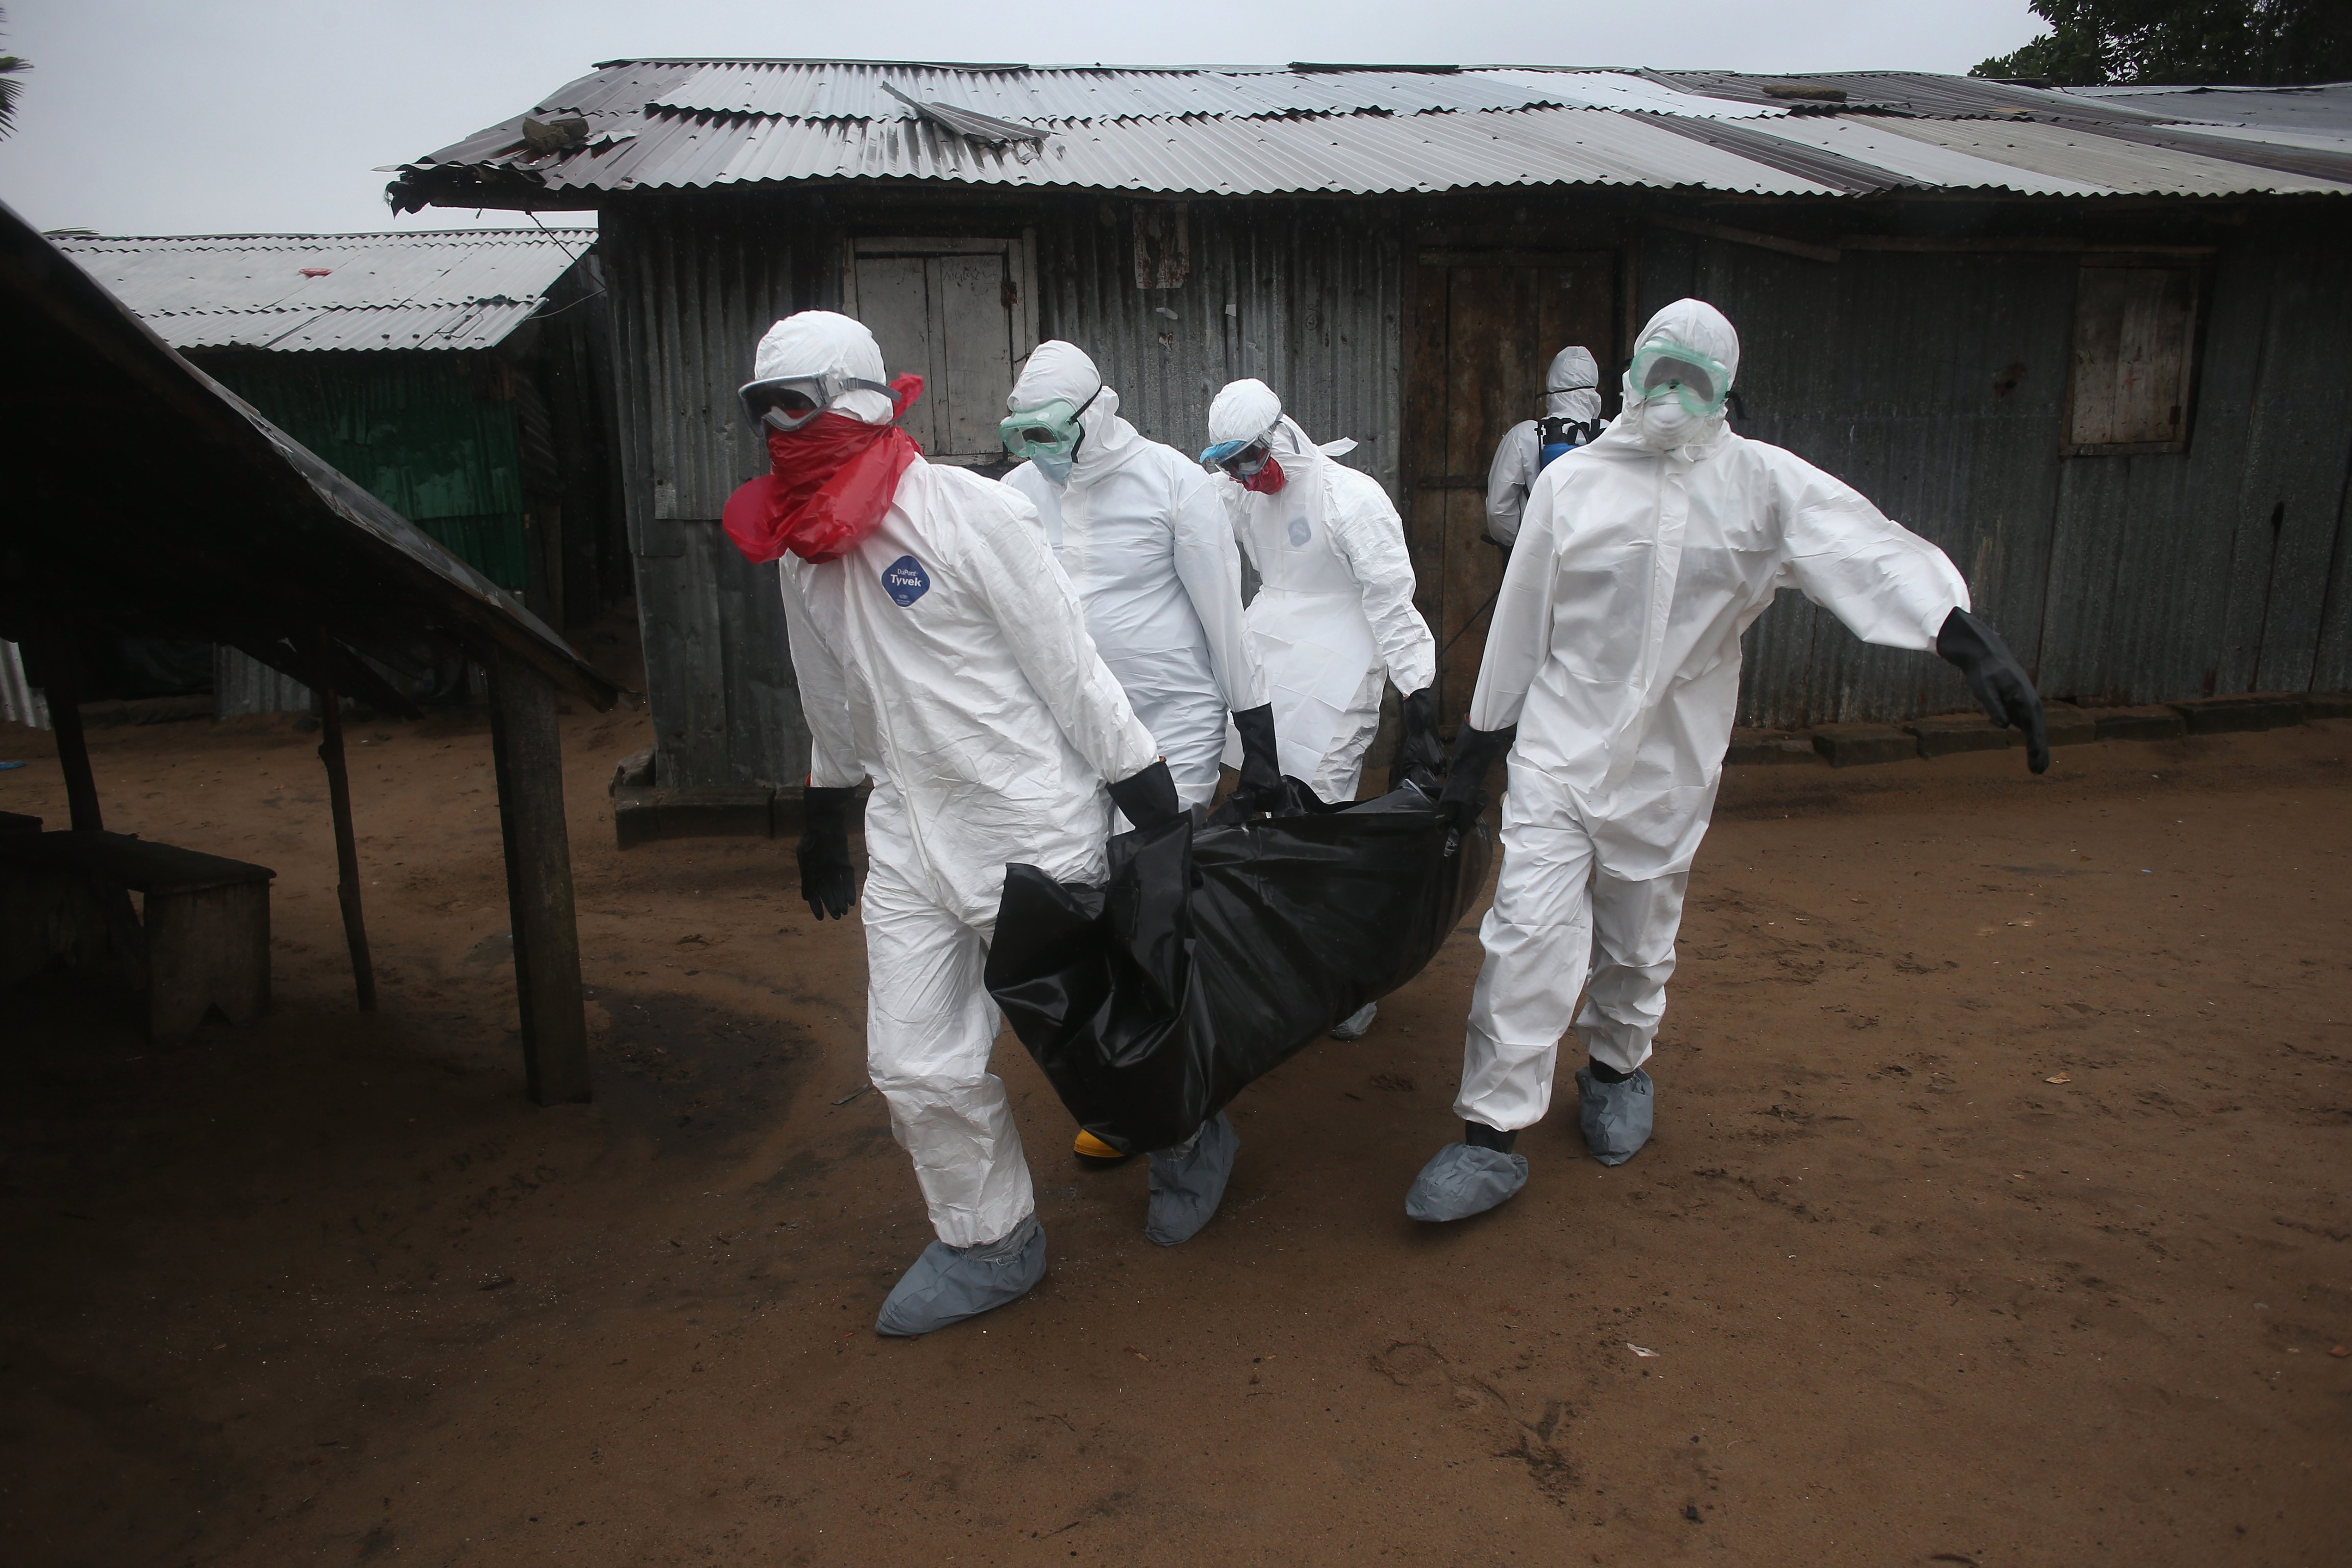 A Liberian burial team wearing protective clothing retrieves the body of a 60-year-old Ebola victim from his home on August 17, 2014 near Monrovia, Liberia. 